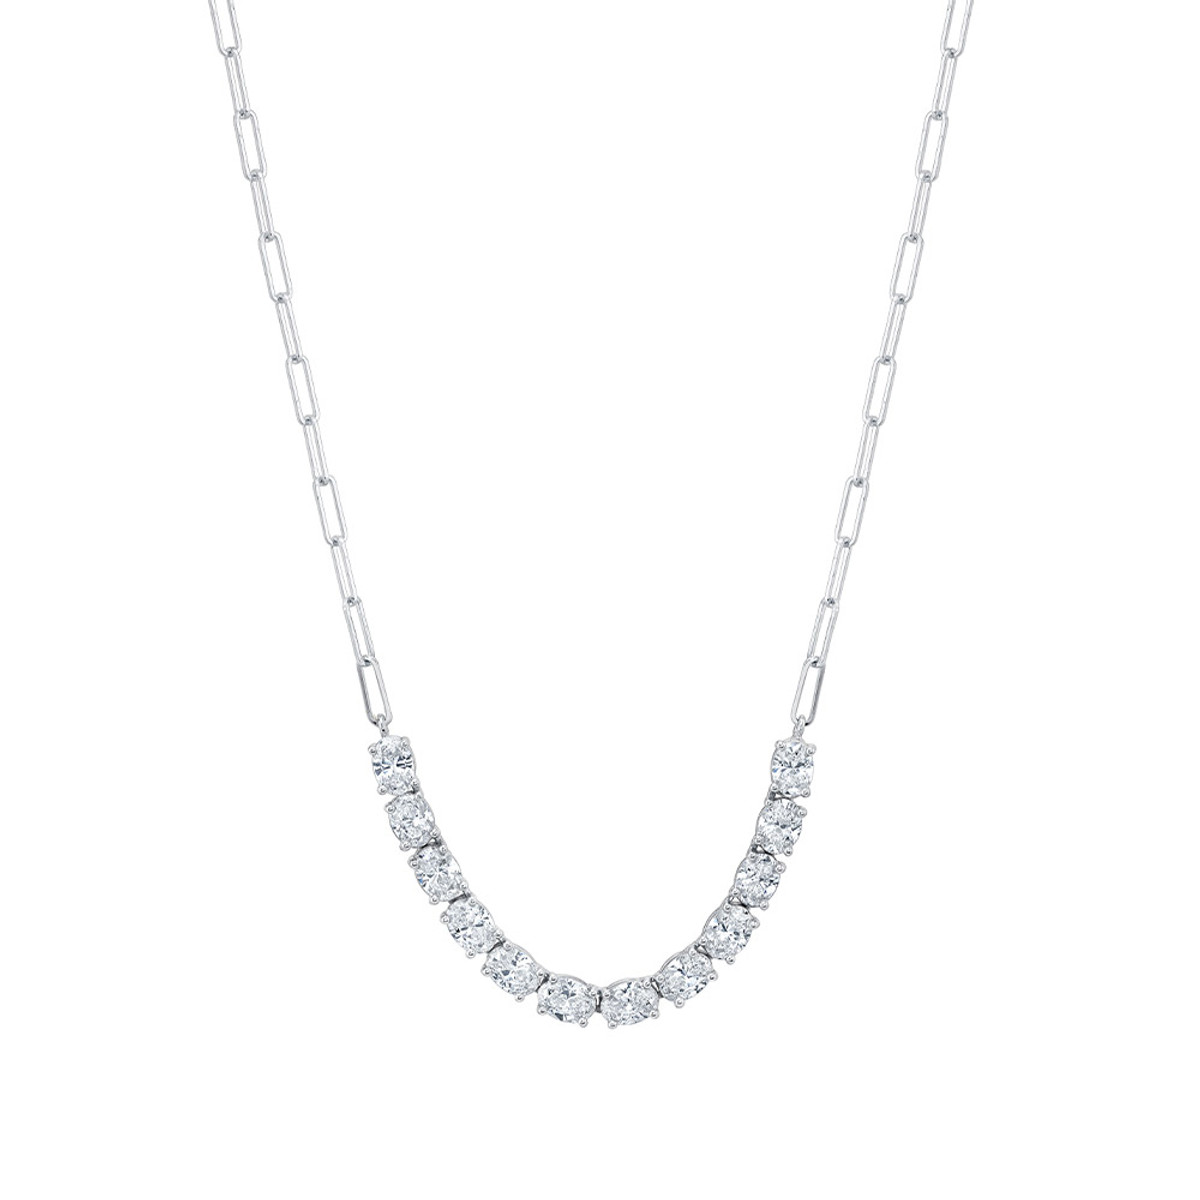 Hyde Park Collection 18K White Gold Oval Diamond Necklace-34599 Product Image